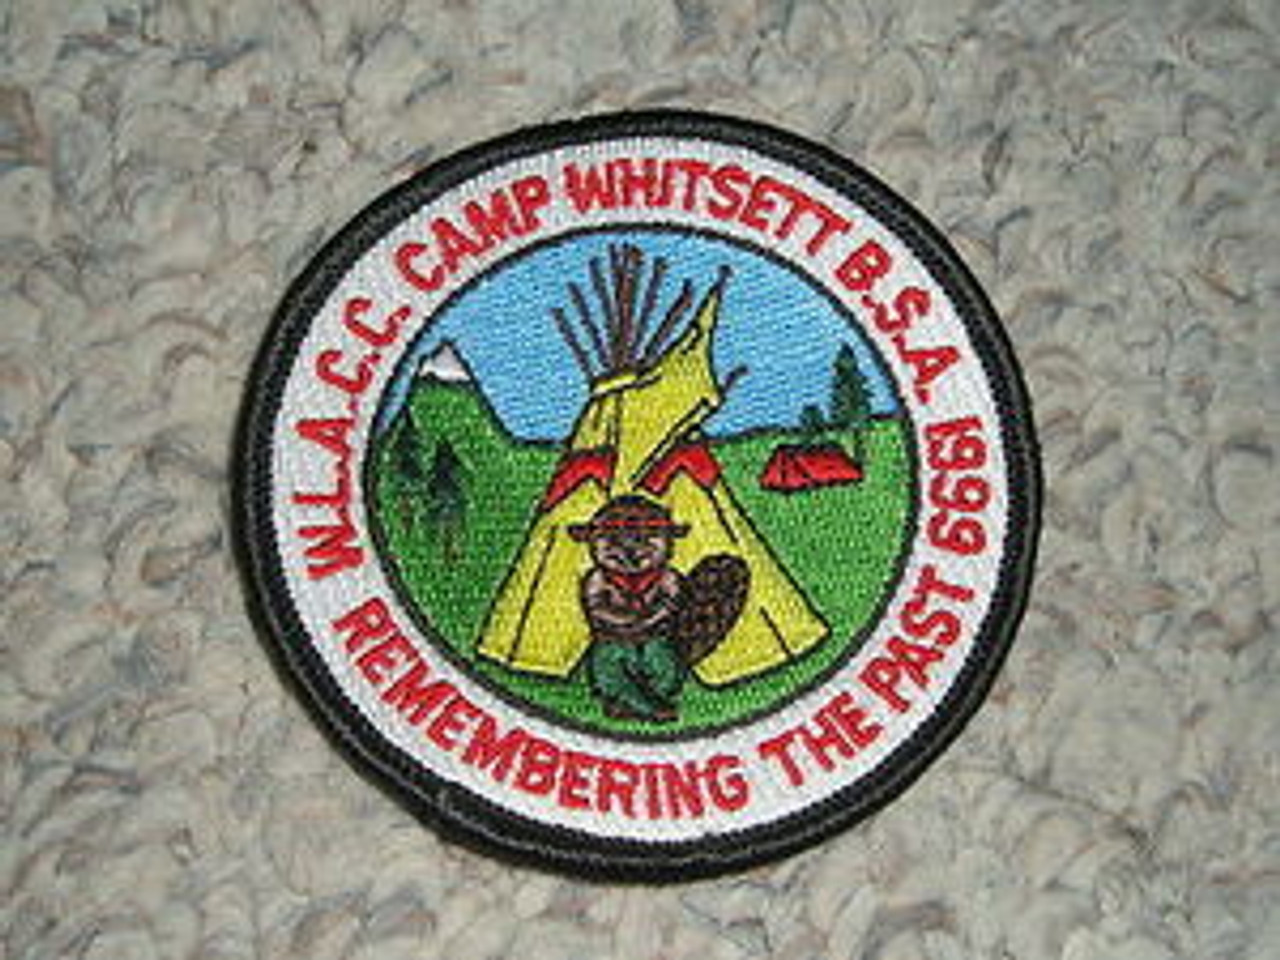 1999 Camp Whitsett Patch - Scout